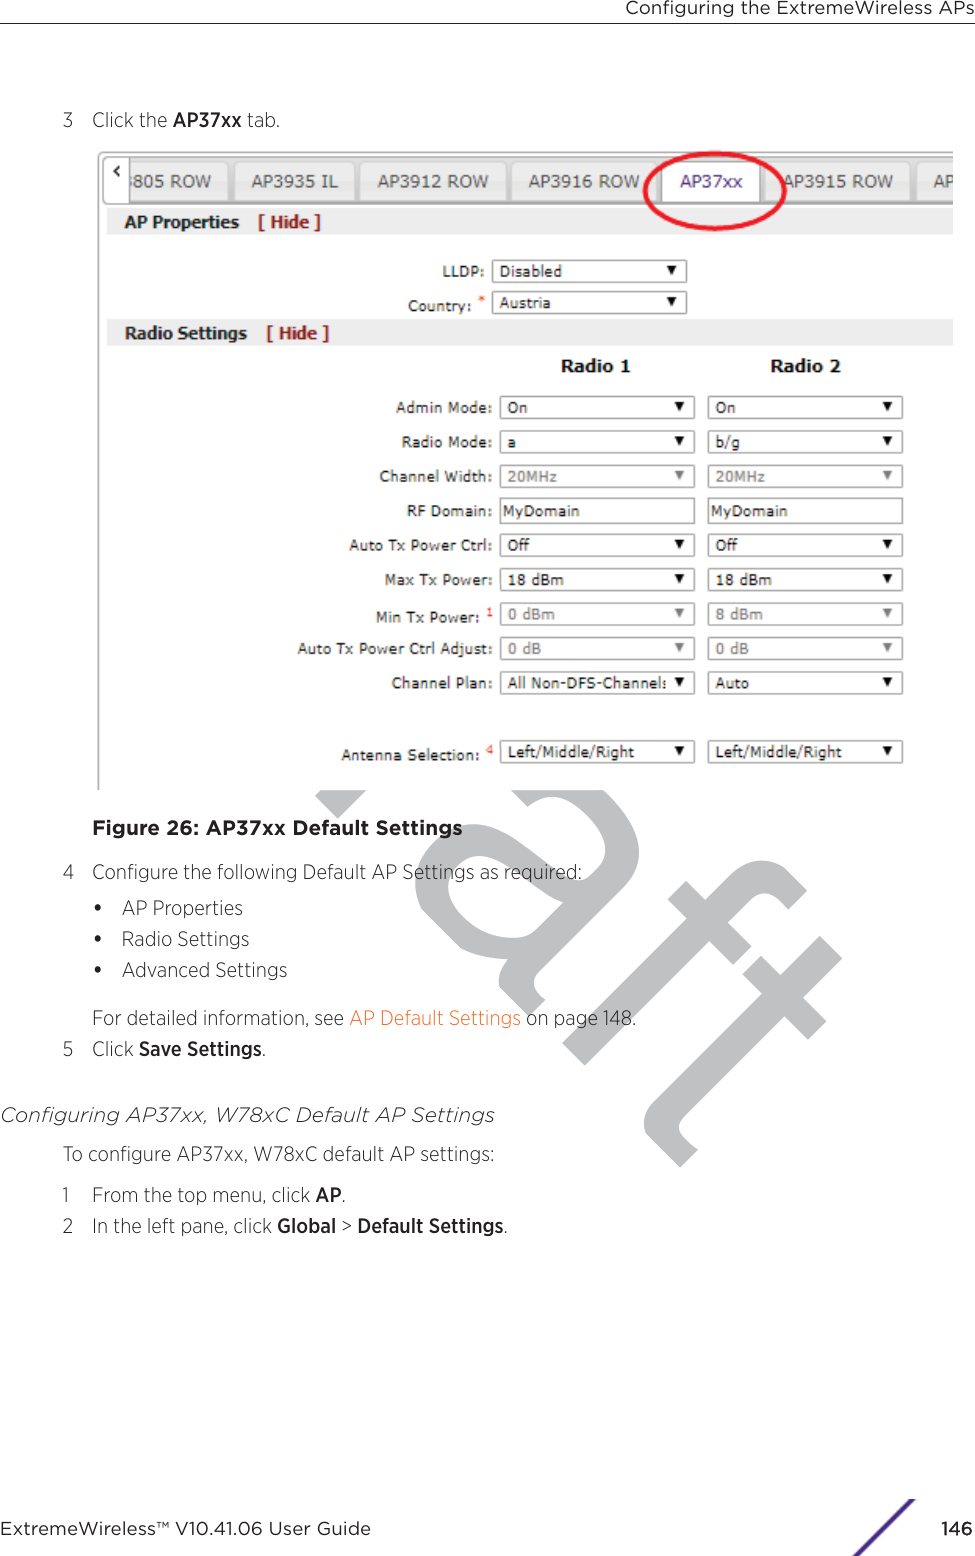 raft3 Click the AP37xx tab.Figure 26: AP37xx Default Settings4 Conﬁgure the following Default AP Settings as required:•AP Properties•Radio Settings•Advanced SettingsFor detailed information, see AP Default Settings on page 148.5 Click Save Settings.Conﬁguring AP37xx, W78xC Default AP SettingsTo conﬁgure AP37xx, W78xC default AP settings:1 From the top menu, click AP.2 In the left pane, click Global &gt; Default Settings.Conﬁguring the ExtremeWireless APsExtremeWireless™ V10.41.06 User Guide 1146